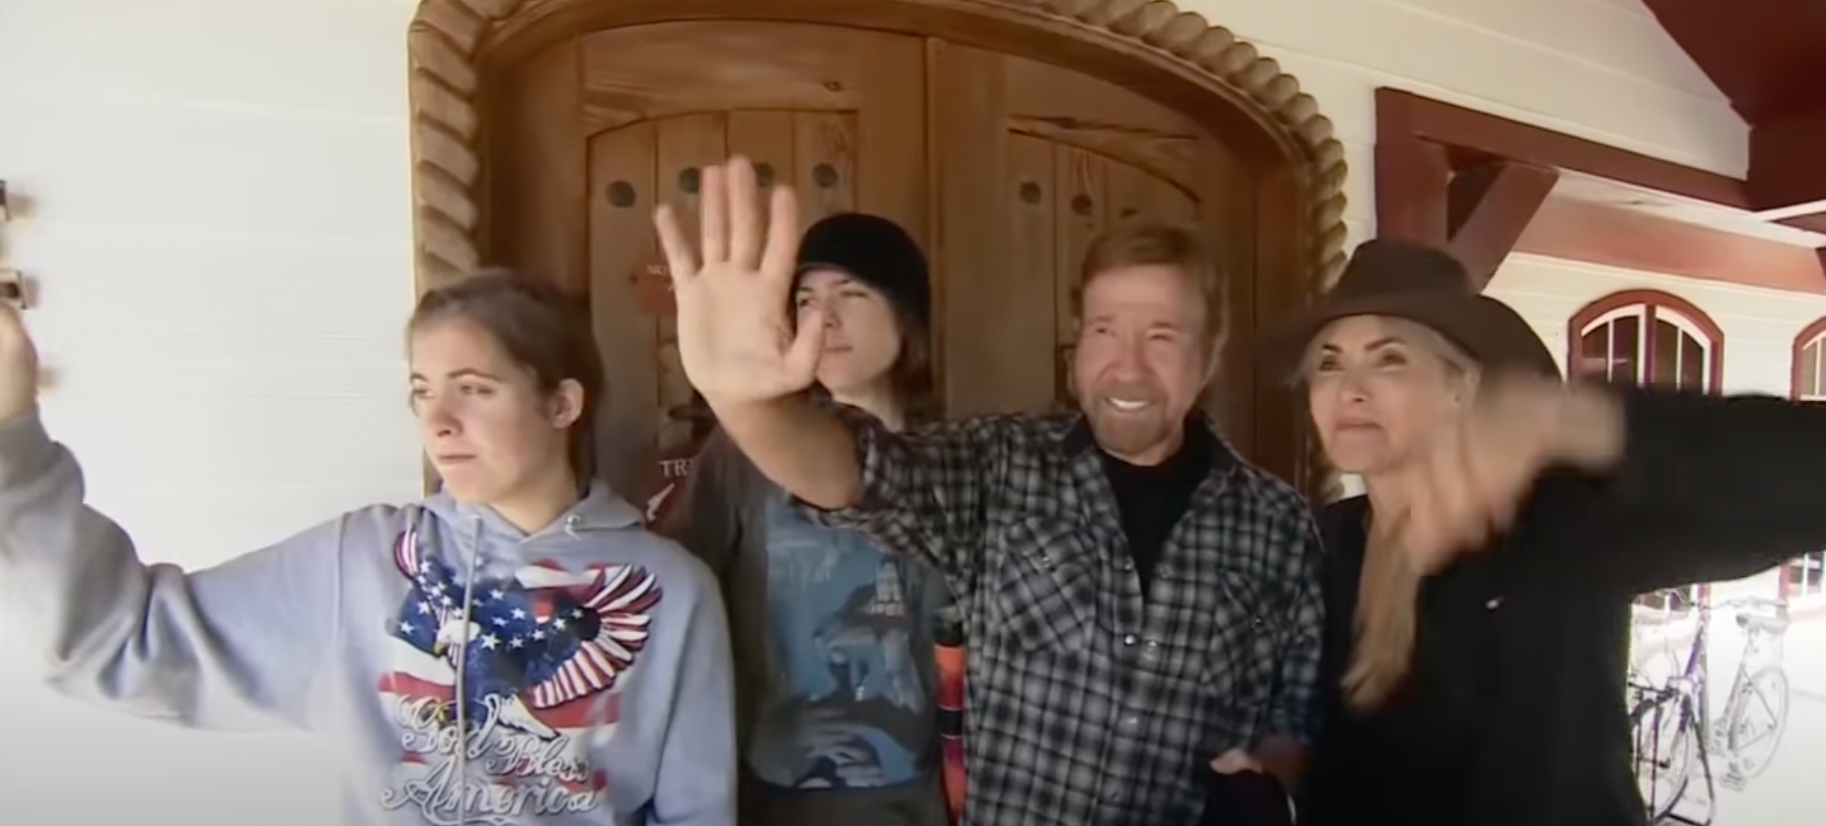 Chuck Norris' and his family at his ranch | Source Youtube.com/TODAY